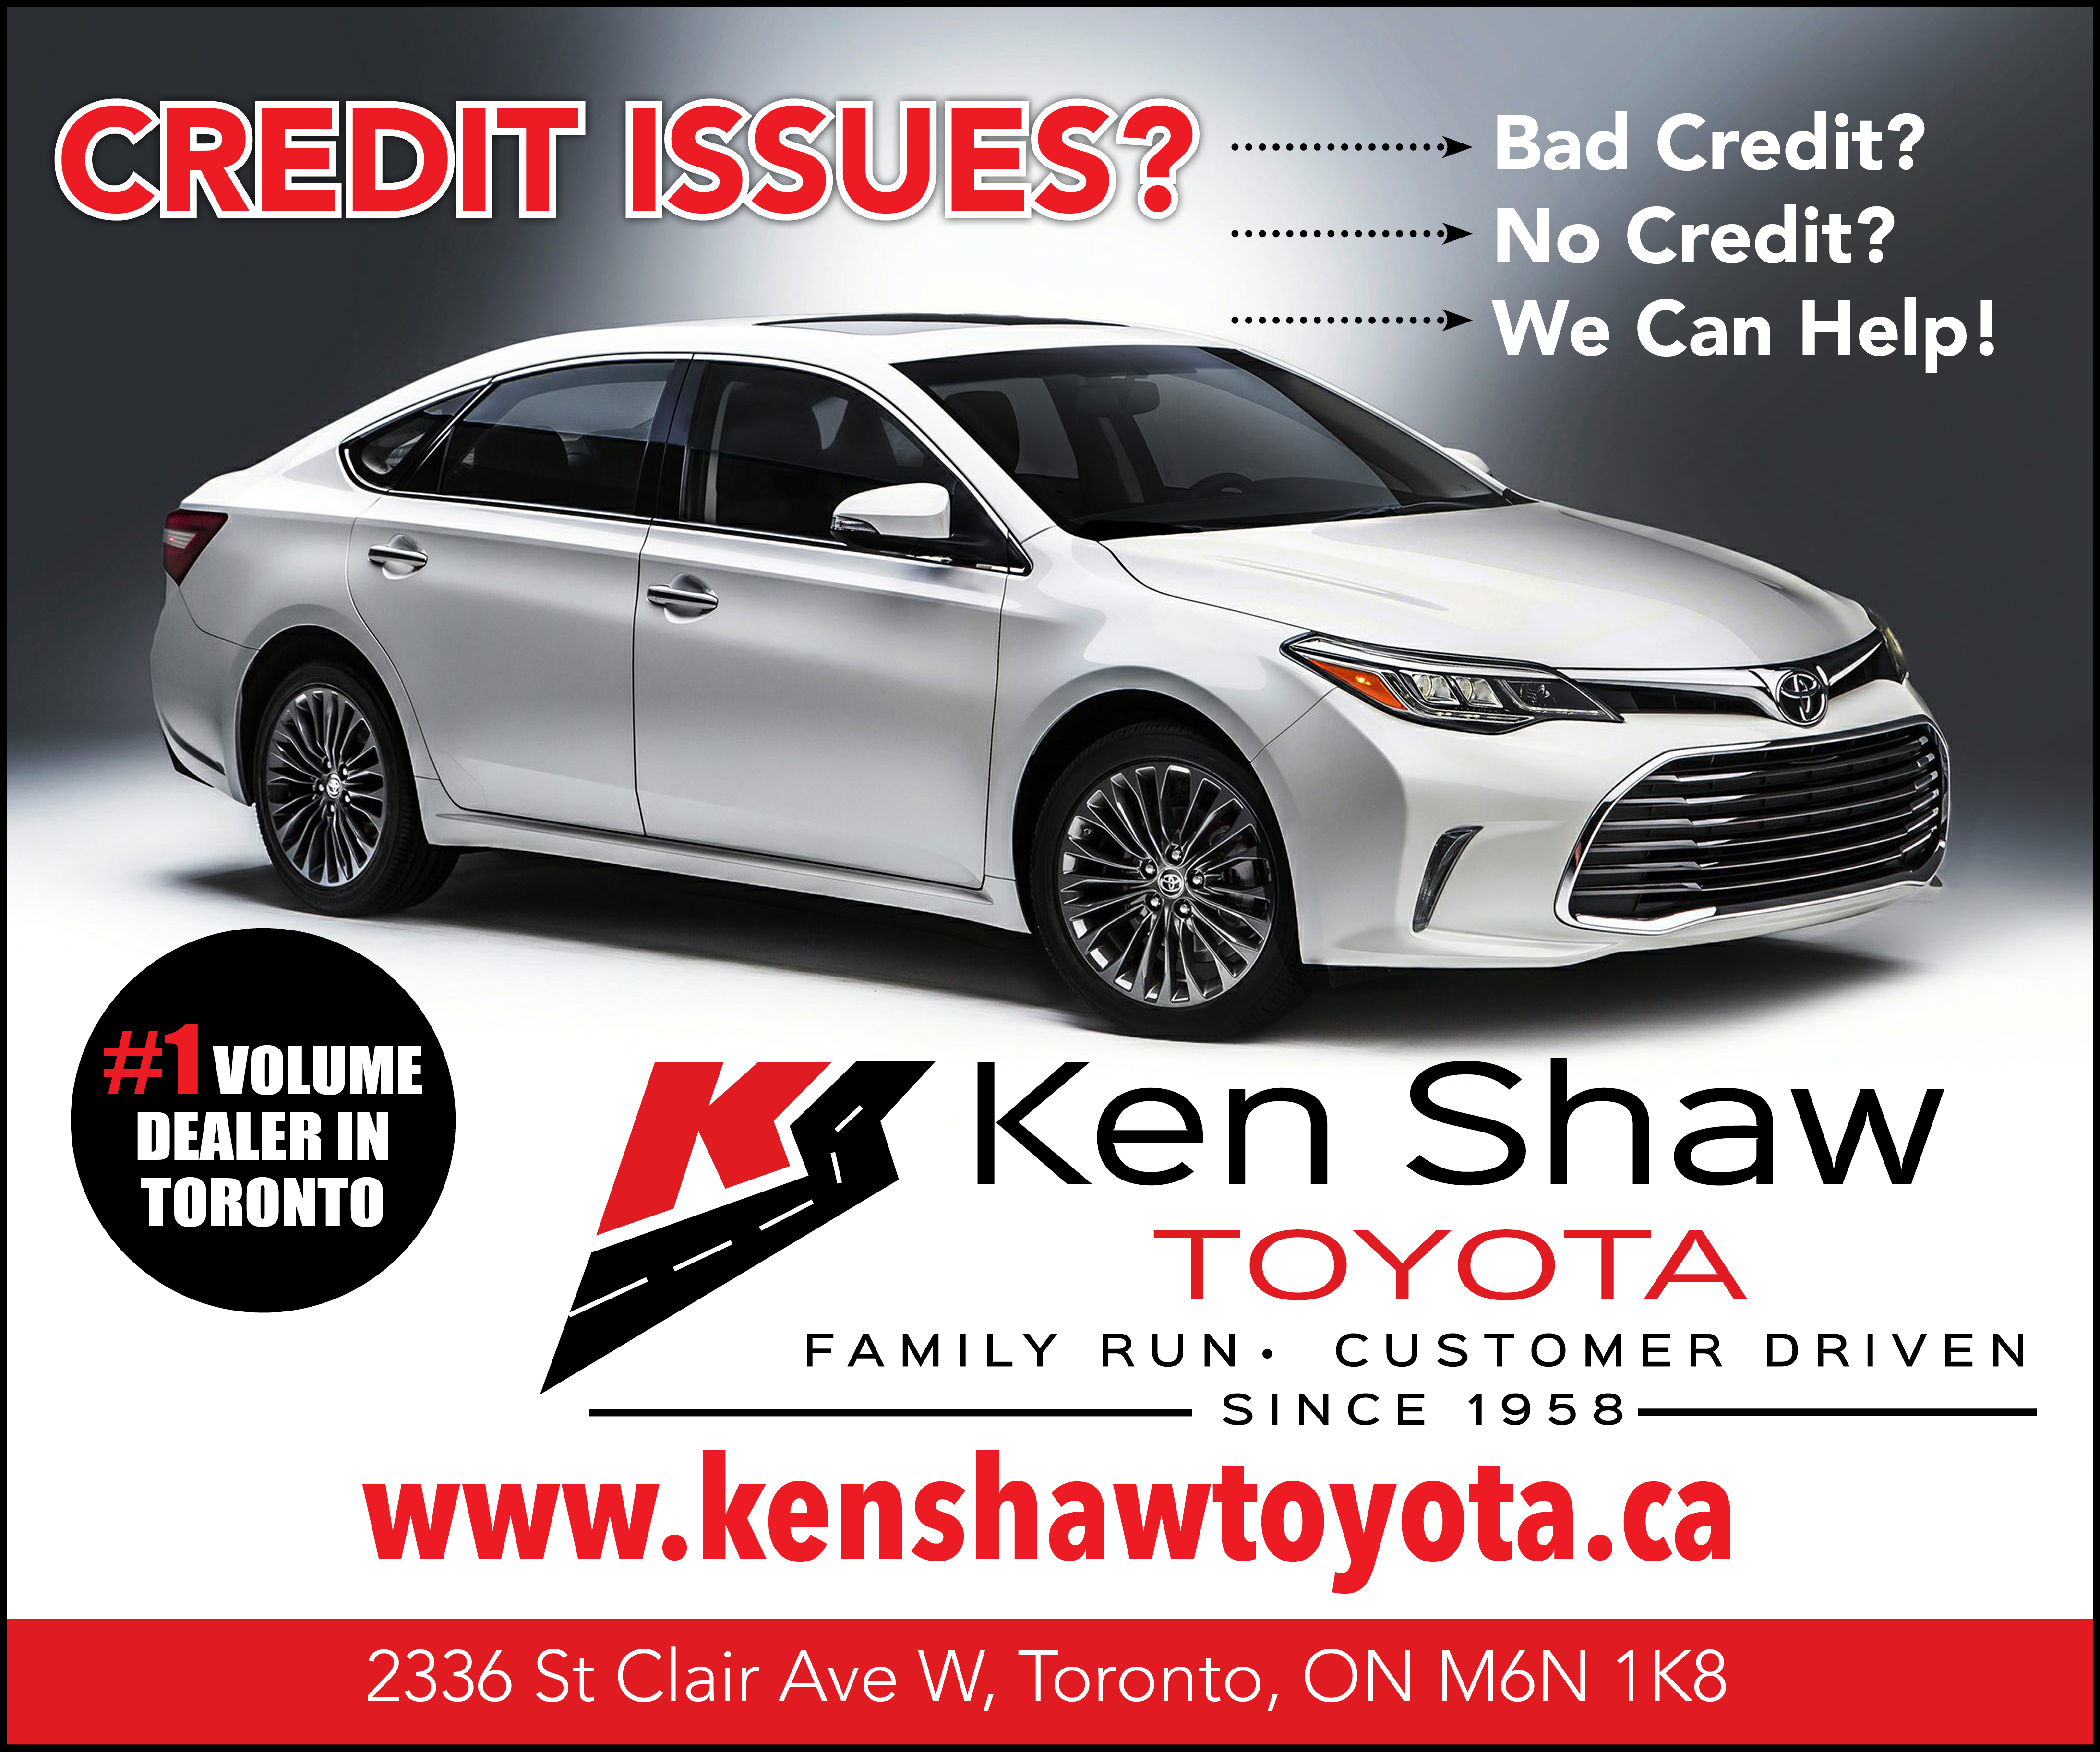 More from Ken Shaw Toyota